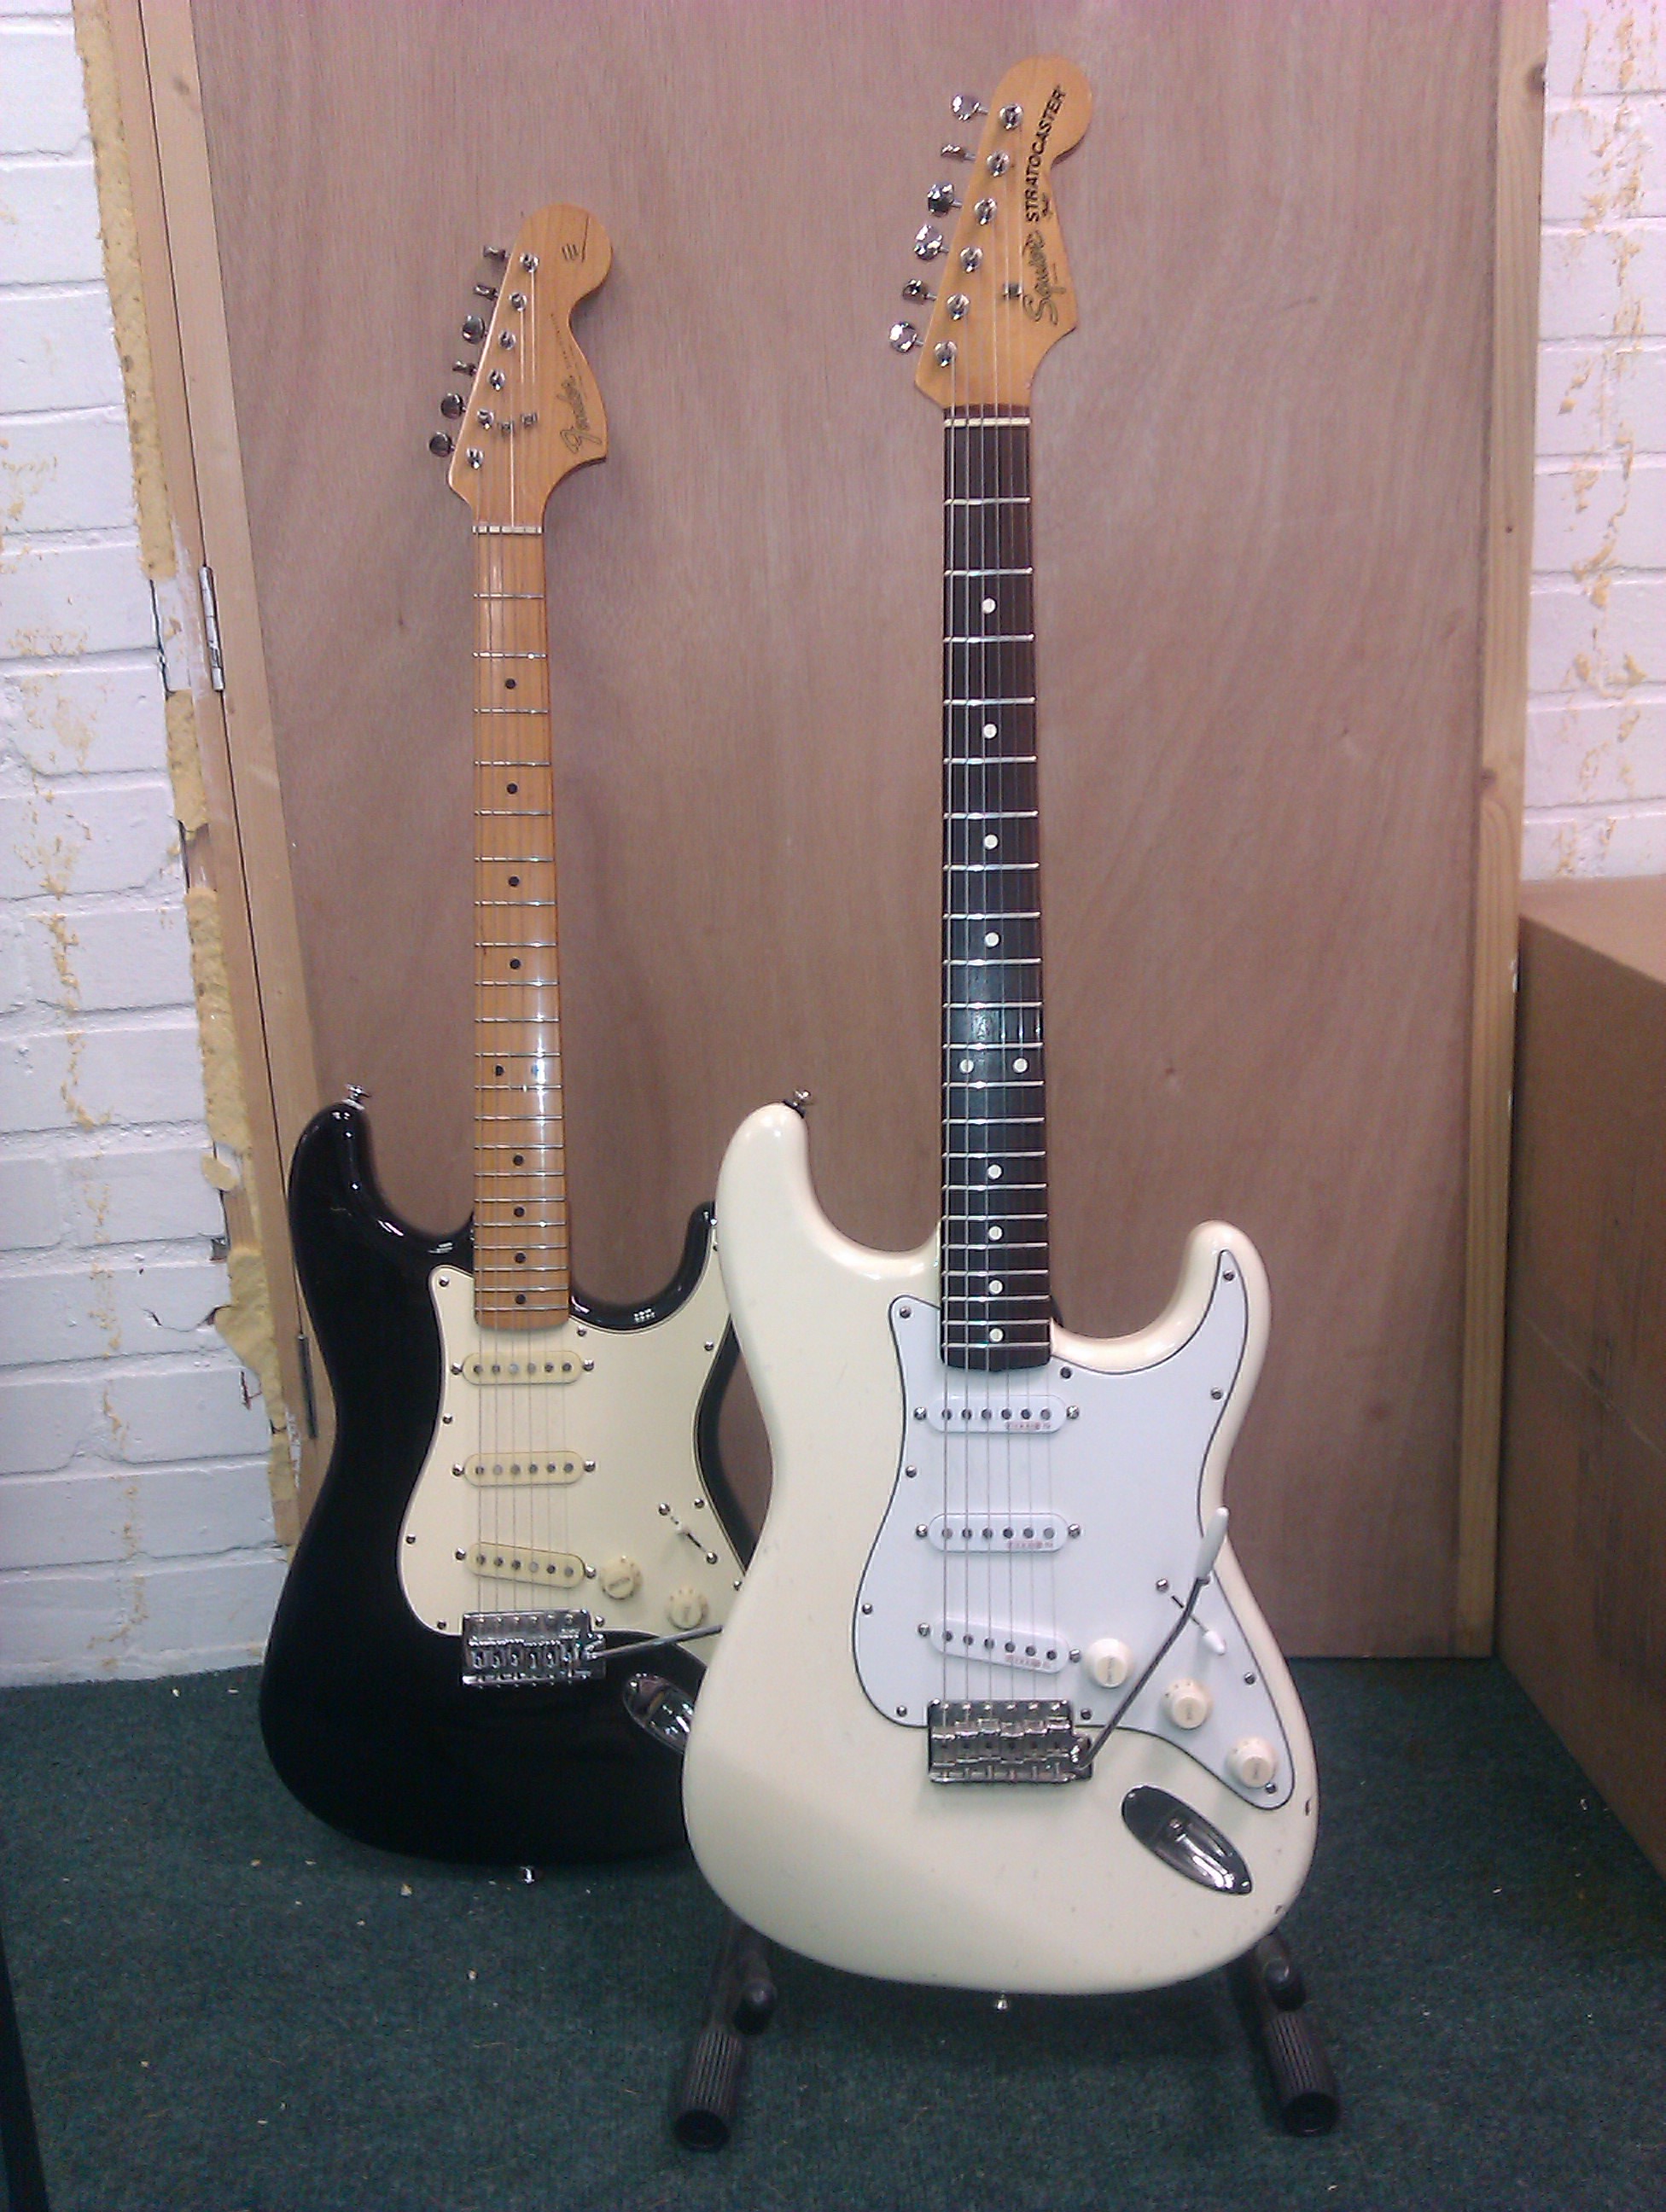 A pair of classic style Strats